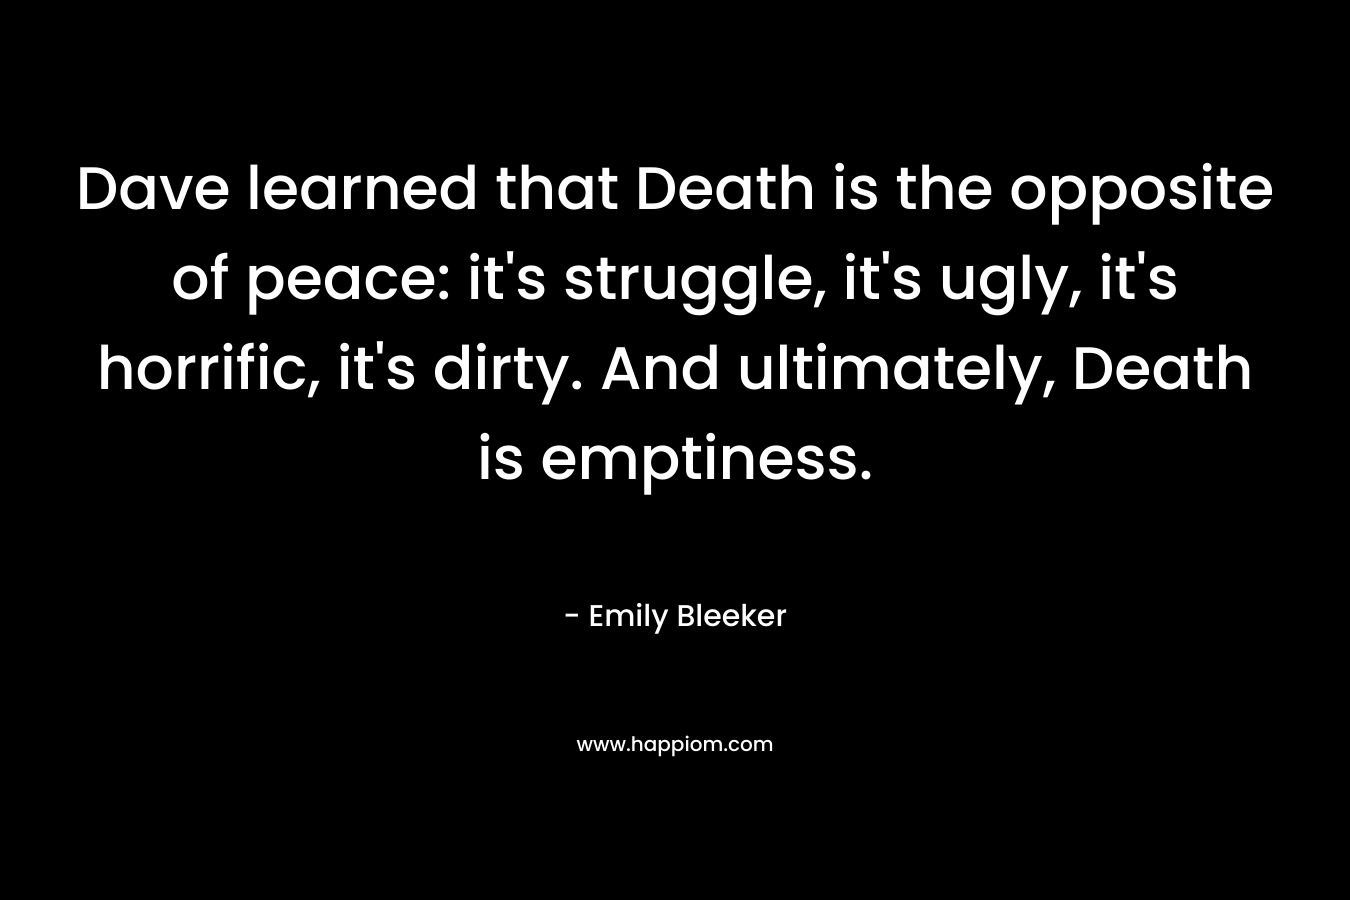 Dave learned that Death is the opposite of peace: it’s struggle, it’s ugly, it’s horrific, it’s dirty. And ultimately, Death is emptiness. – Emily Bleeker